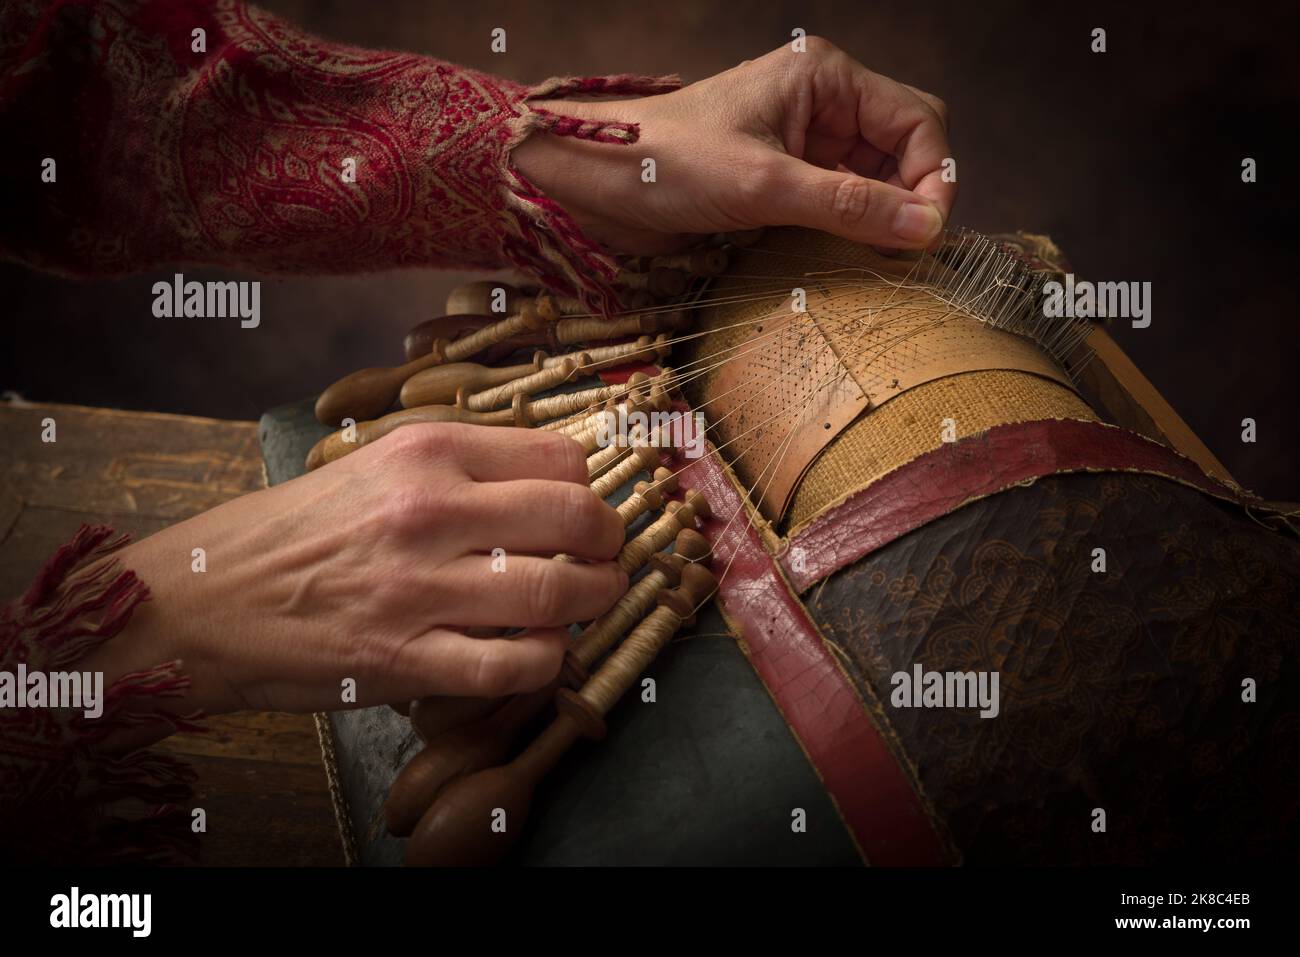 Hands of a woman working on an antique Flemish lace making pillow Stock Photo